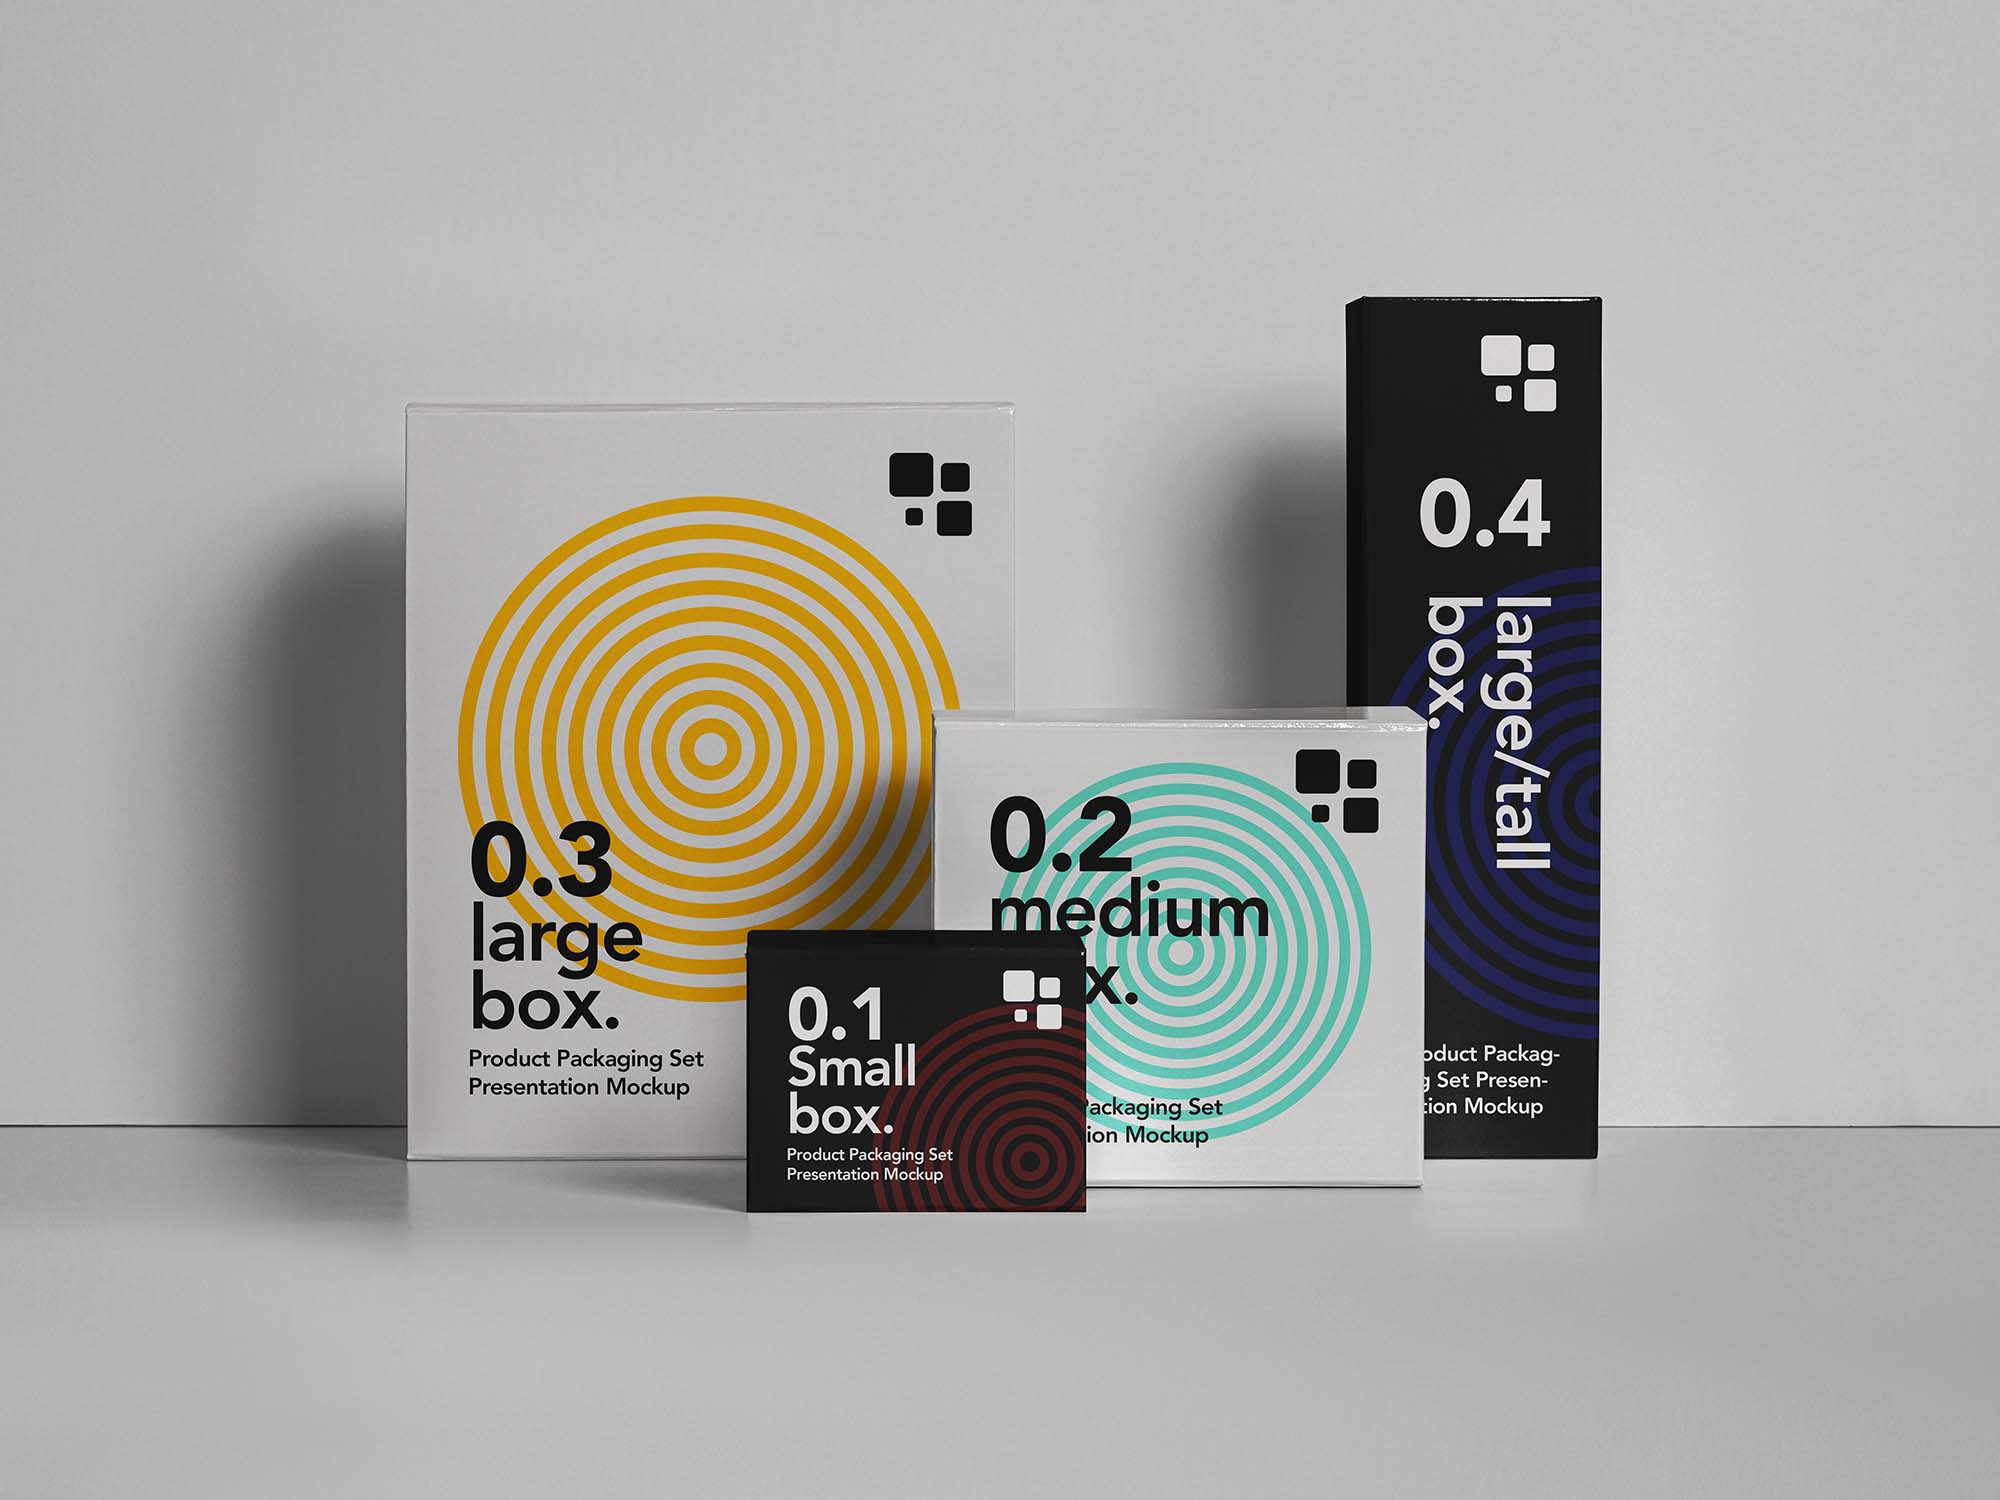 Different sized Box Packaging Mockups